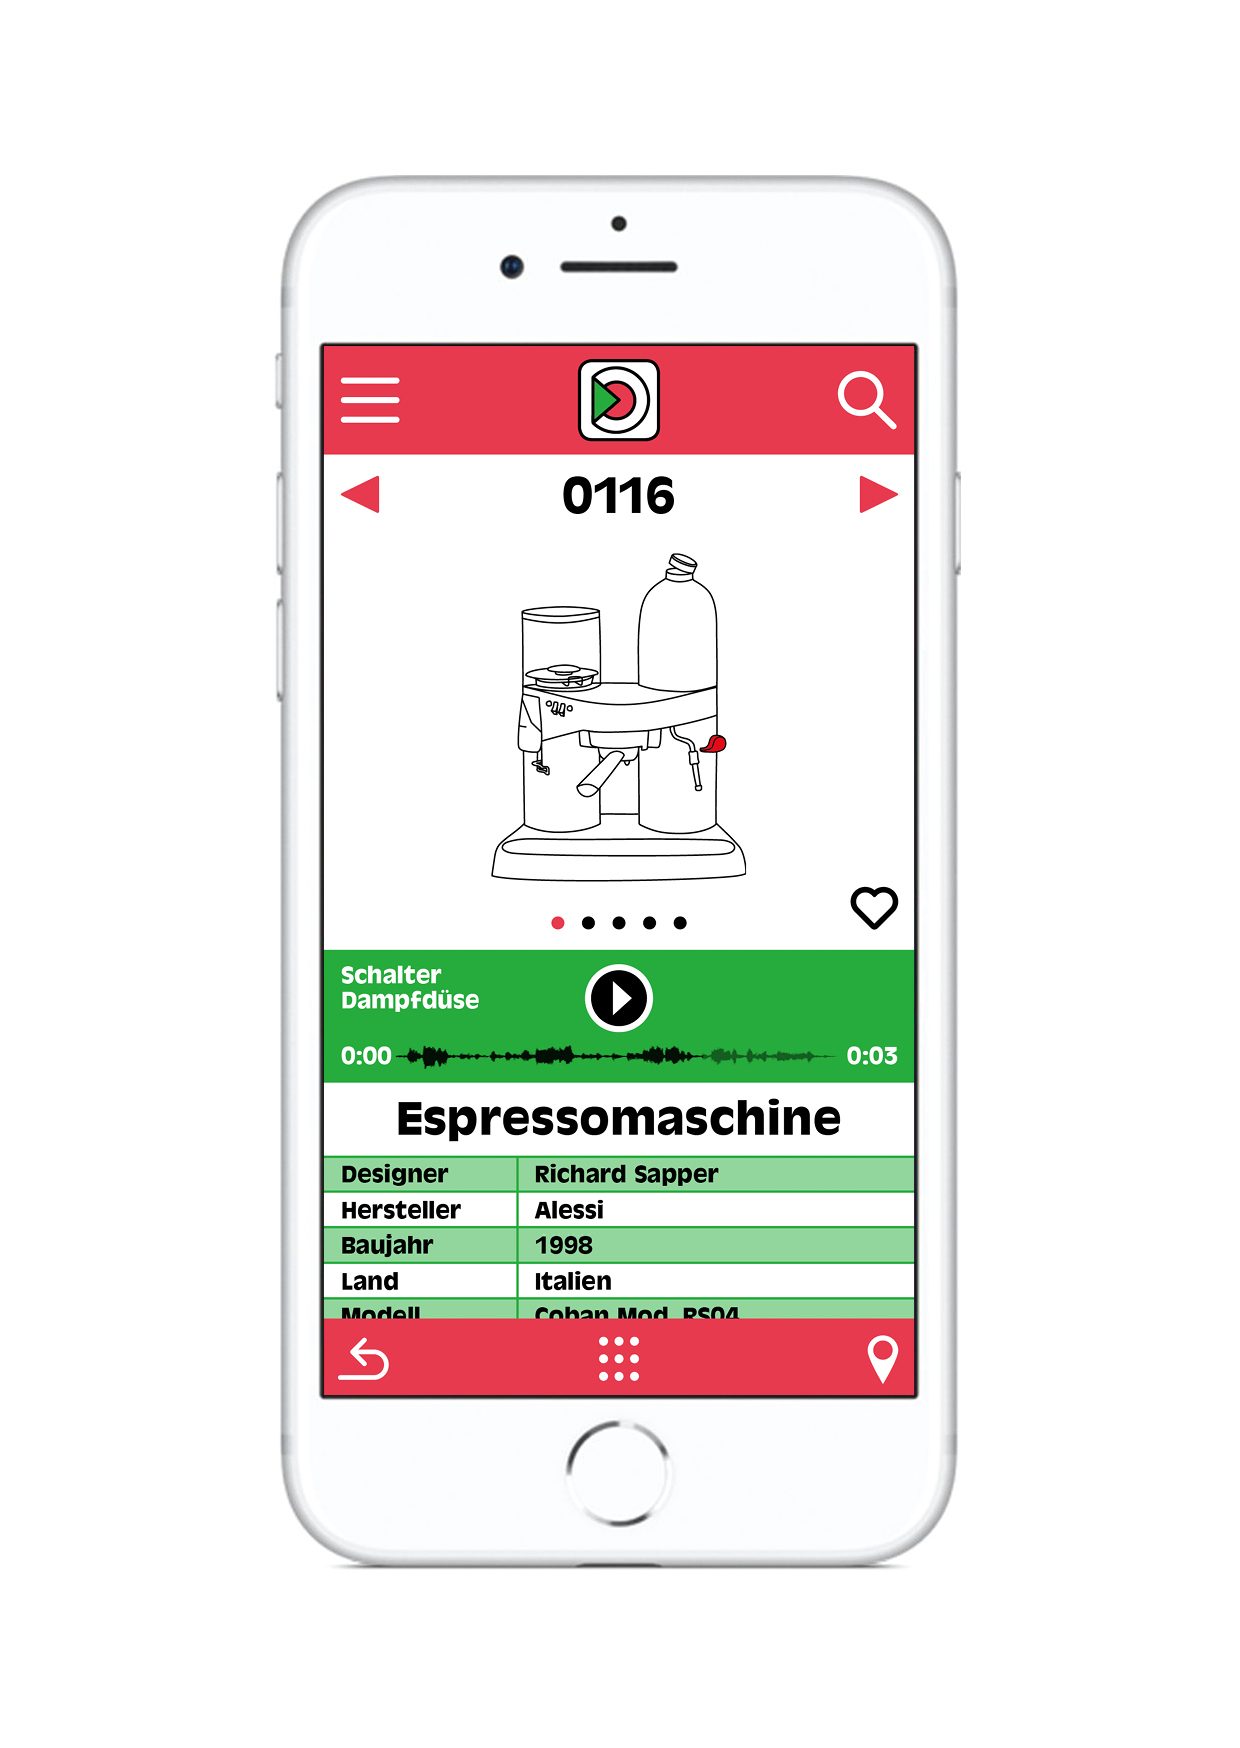 Photograph of a smartphone on a white background. The app is displayed on the screen in green and red. You can see the logo, a drawing of an espresso machine, a soundtrack and a table with information about the object.